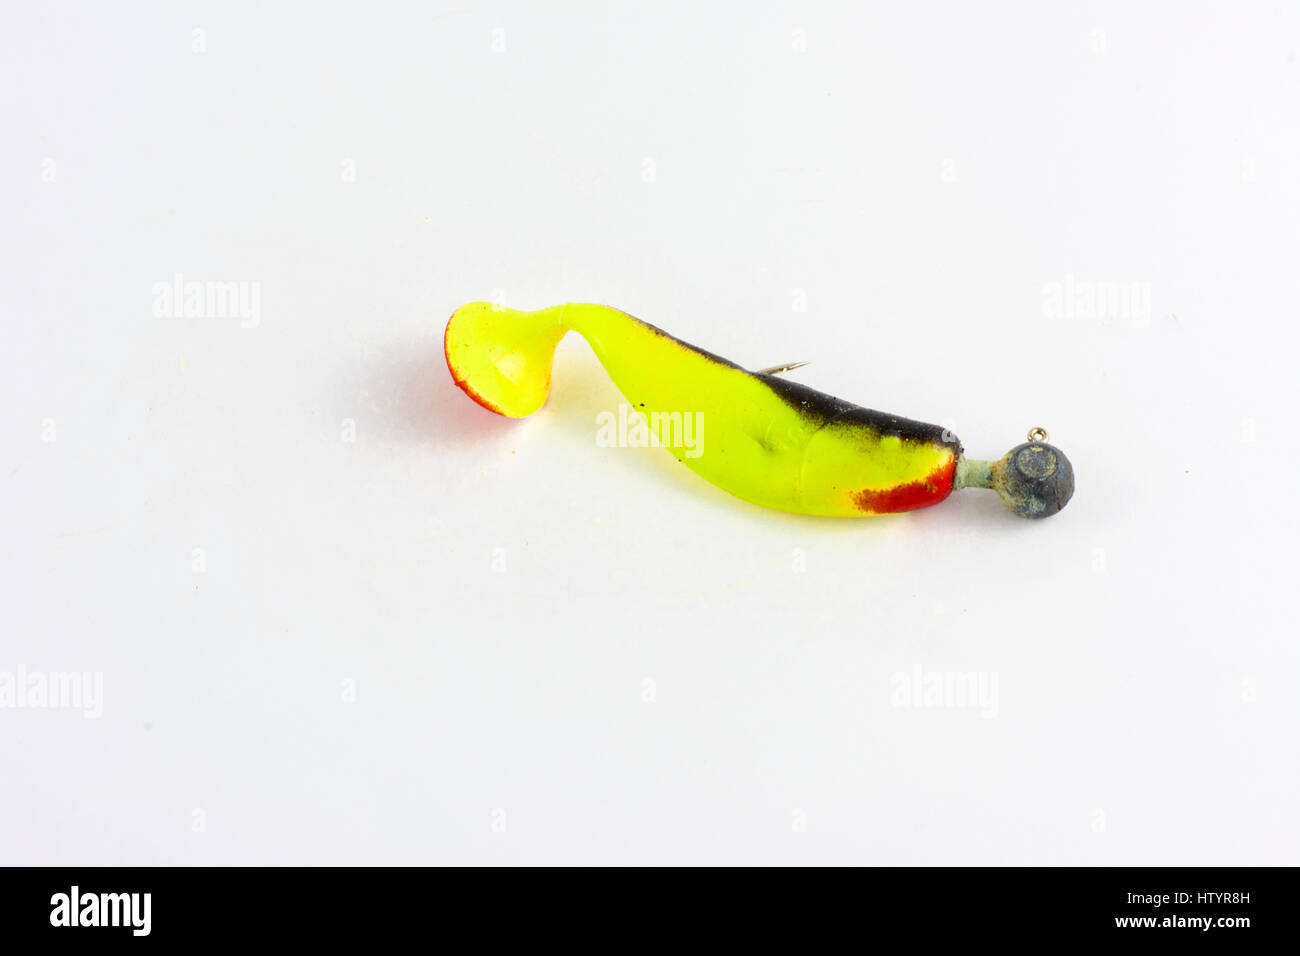 https://c8.alamy.com/comp/HTYR8H/exhibition-of-pirated-copies-of-fishing-metal-spoon-baits-bait-for-HTYR8H.jpg